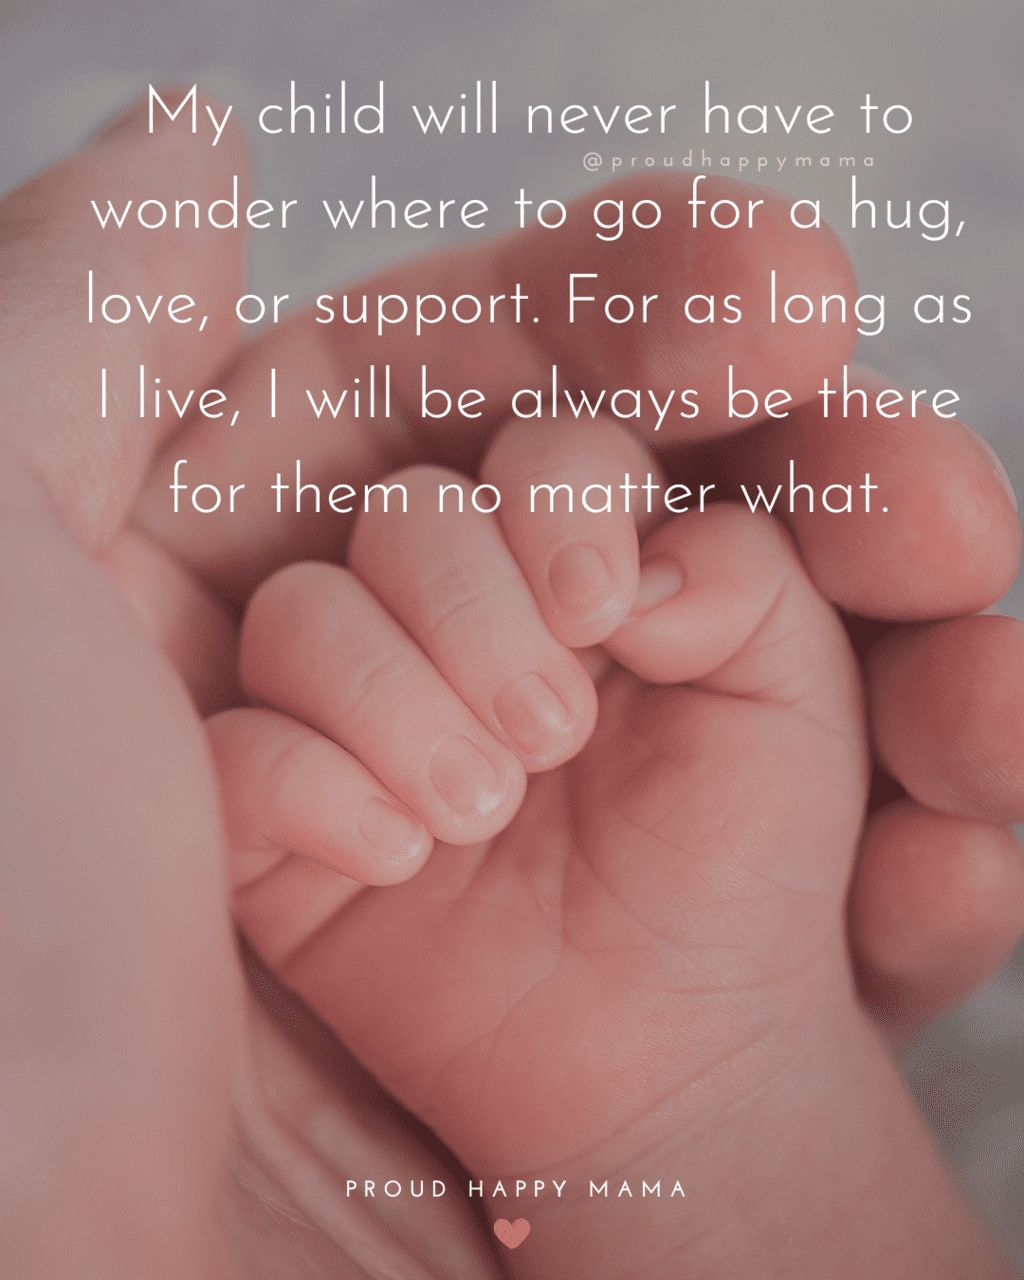 Happy Pregnancy Quotes | My child will never have to wonder where to go for a hug, love, or support. For as long as I love, I will always be there for them no matter what.